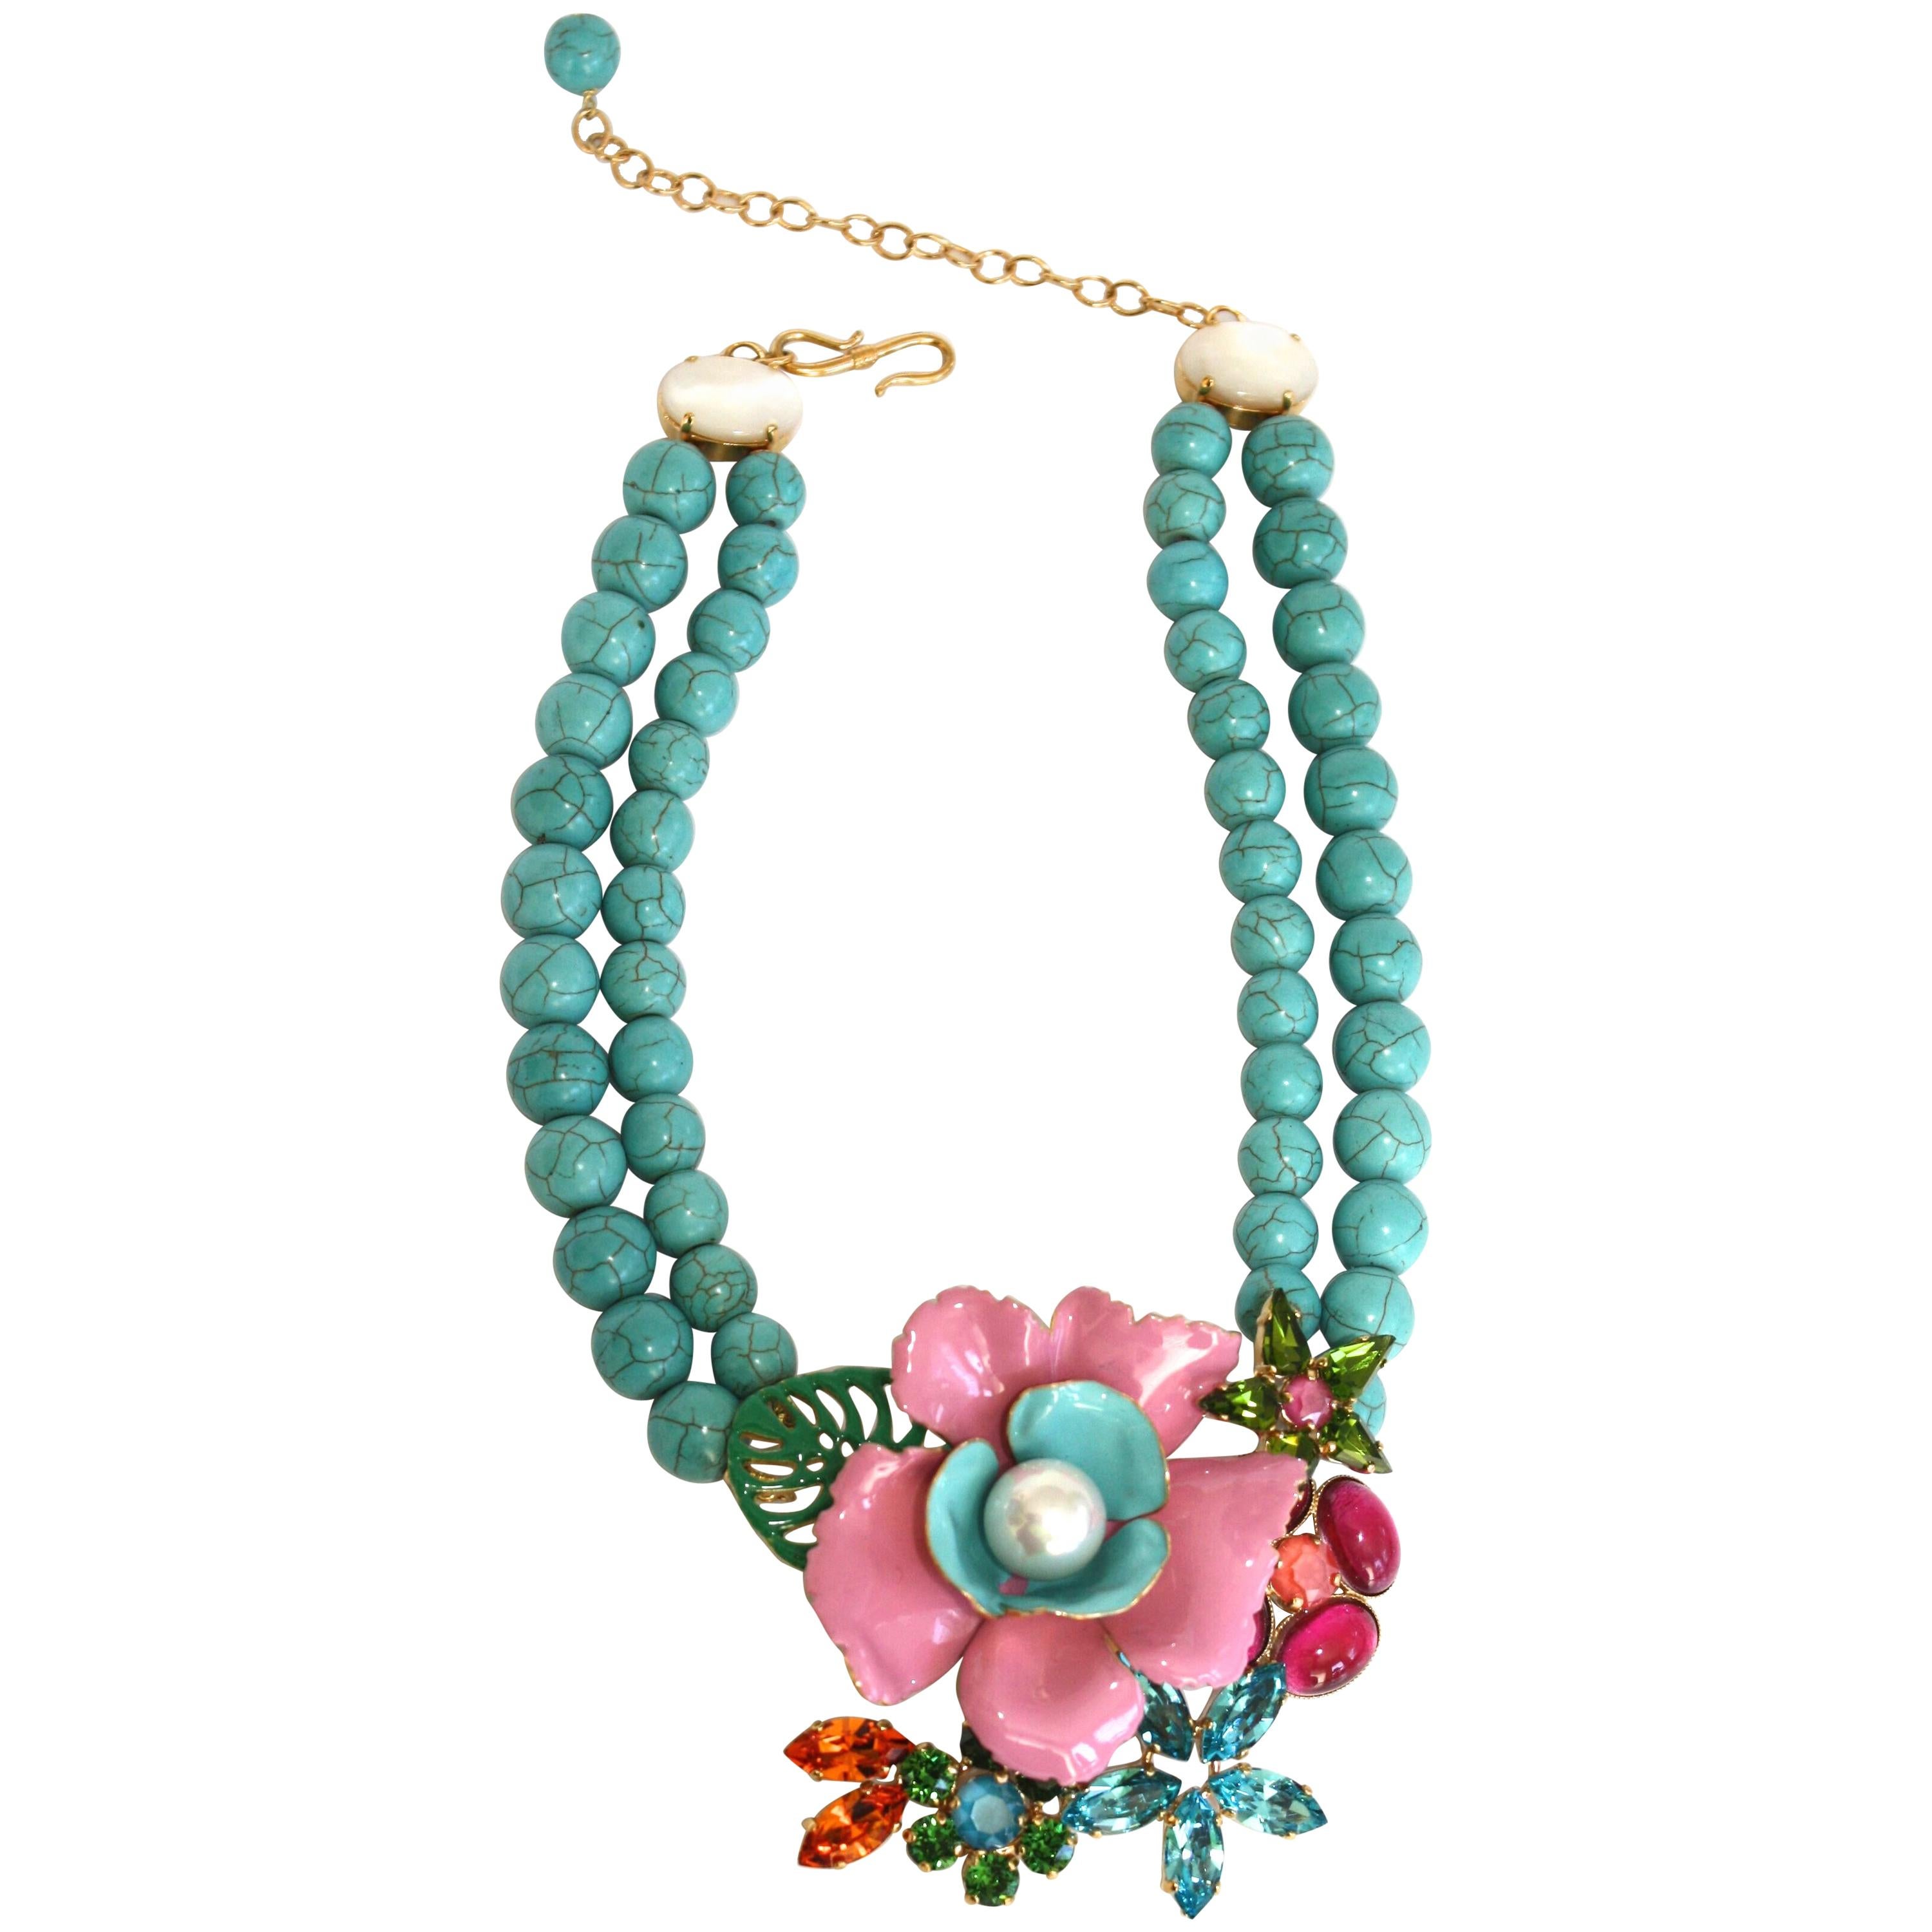 Philippe Ferrandis Small Turquoise Necklace with Enamel and Swarovski Crystals